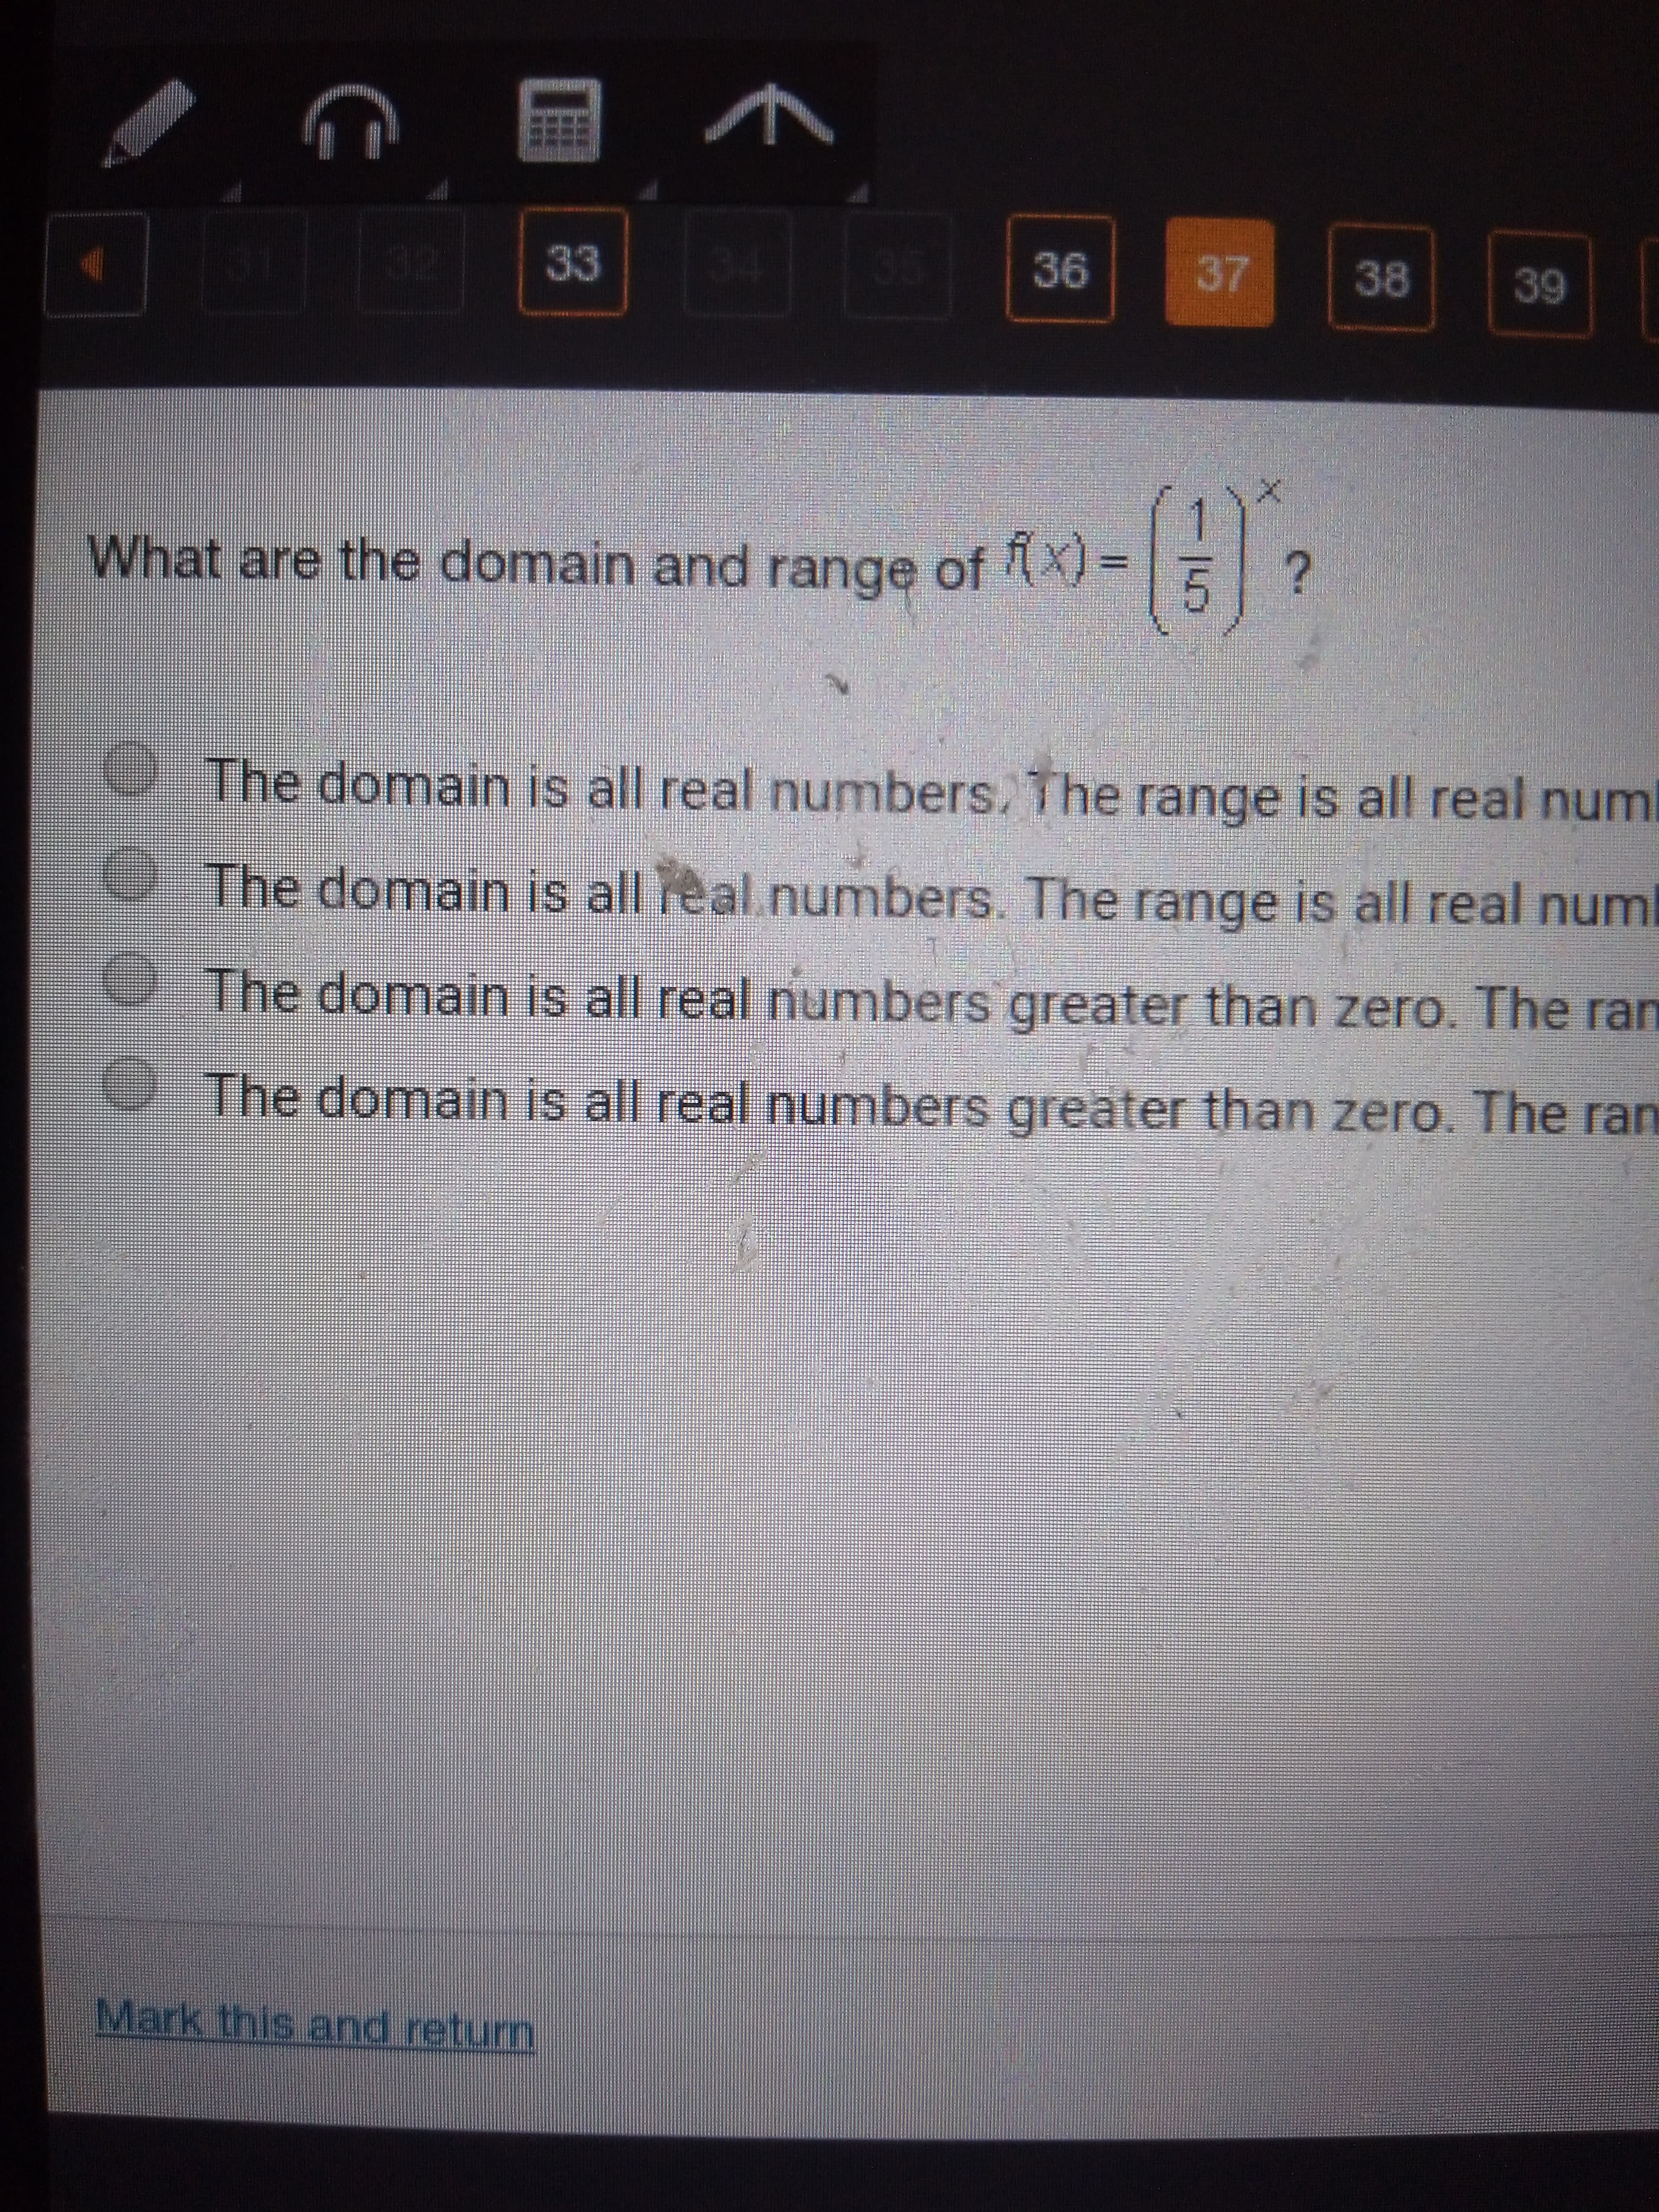 37
36
38
33
39
-G>
What are the domain and range of X=
The domain is all real numbers. The range is all real numl
The domain is all real numbers. The range is all real num
The domain is all real numbers greater than zero. The ran
The domain is all real numbers greater than zero. The ran
Mark this and retun
